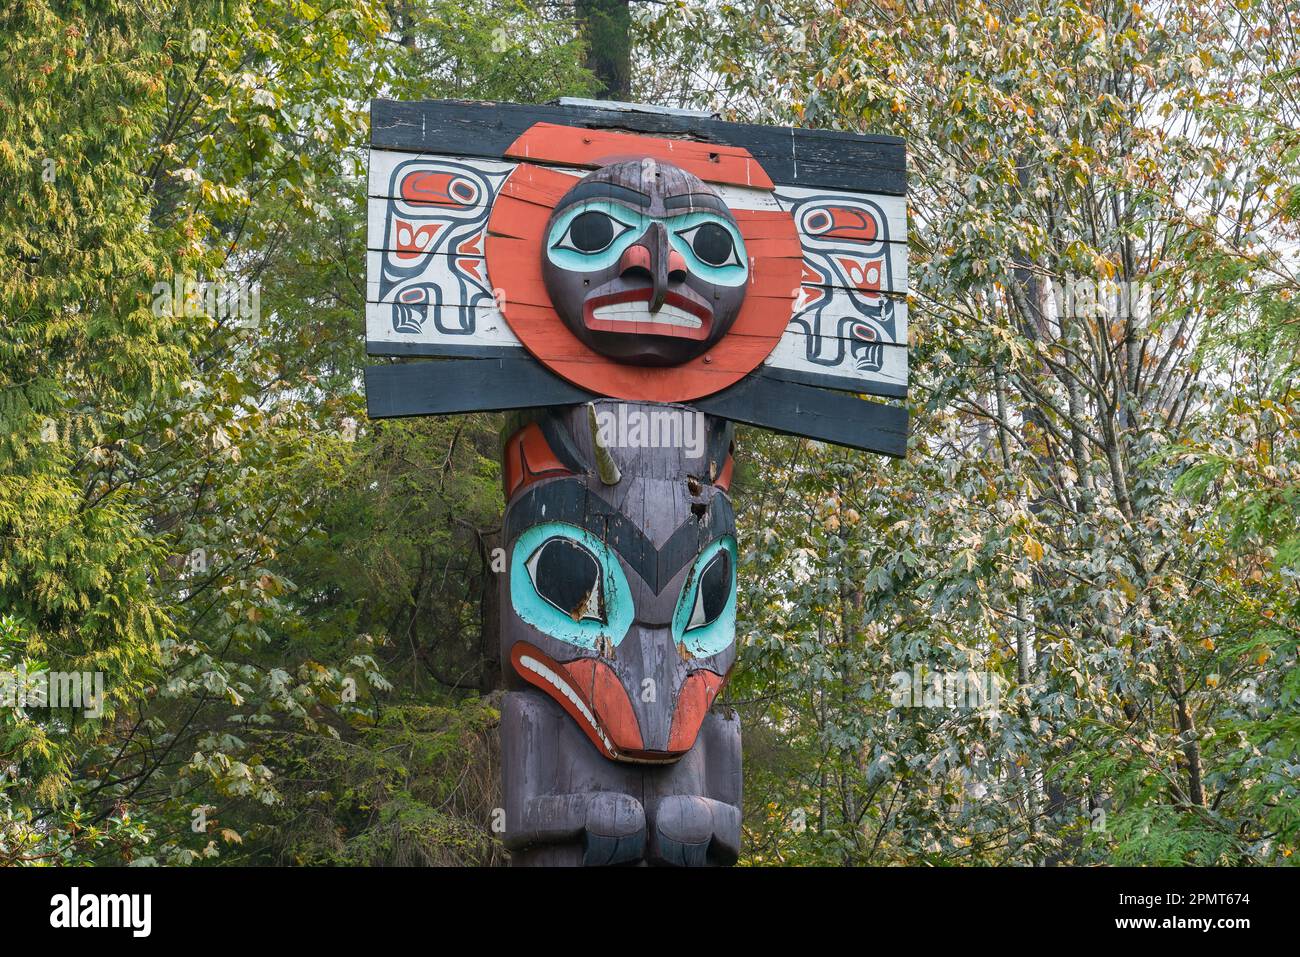 Vancouver, Canada - September 11, 2022: Totem pole in Staley Park is one of many First Nations totem pole on display at the park. Stock Photo